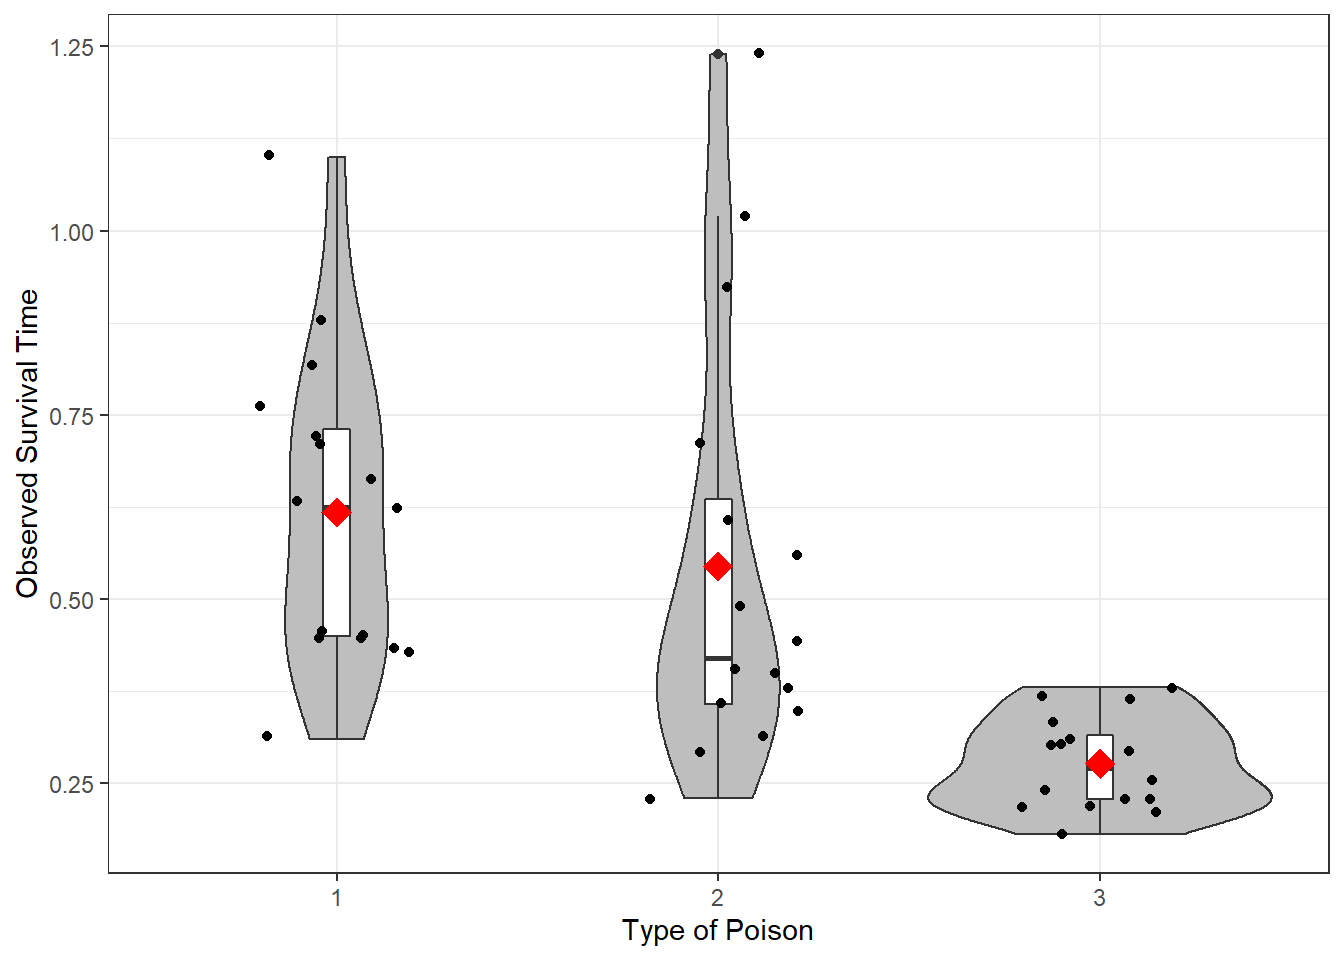 Distribution of Survival Time by Poison Type: Violin and Box plots used to Compare Means and Standard Deviations